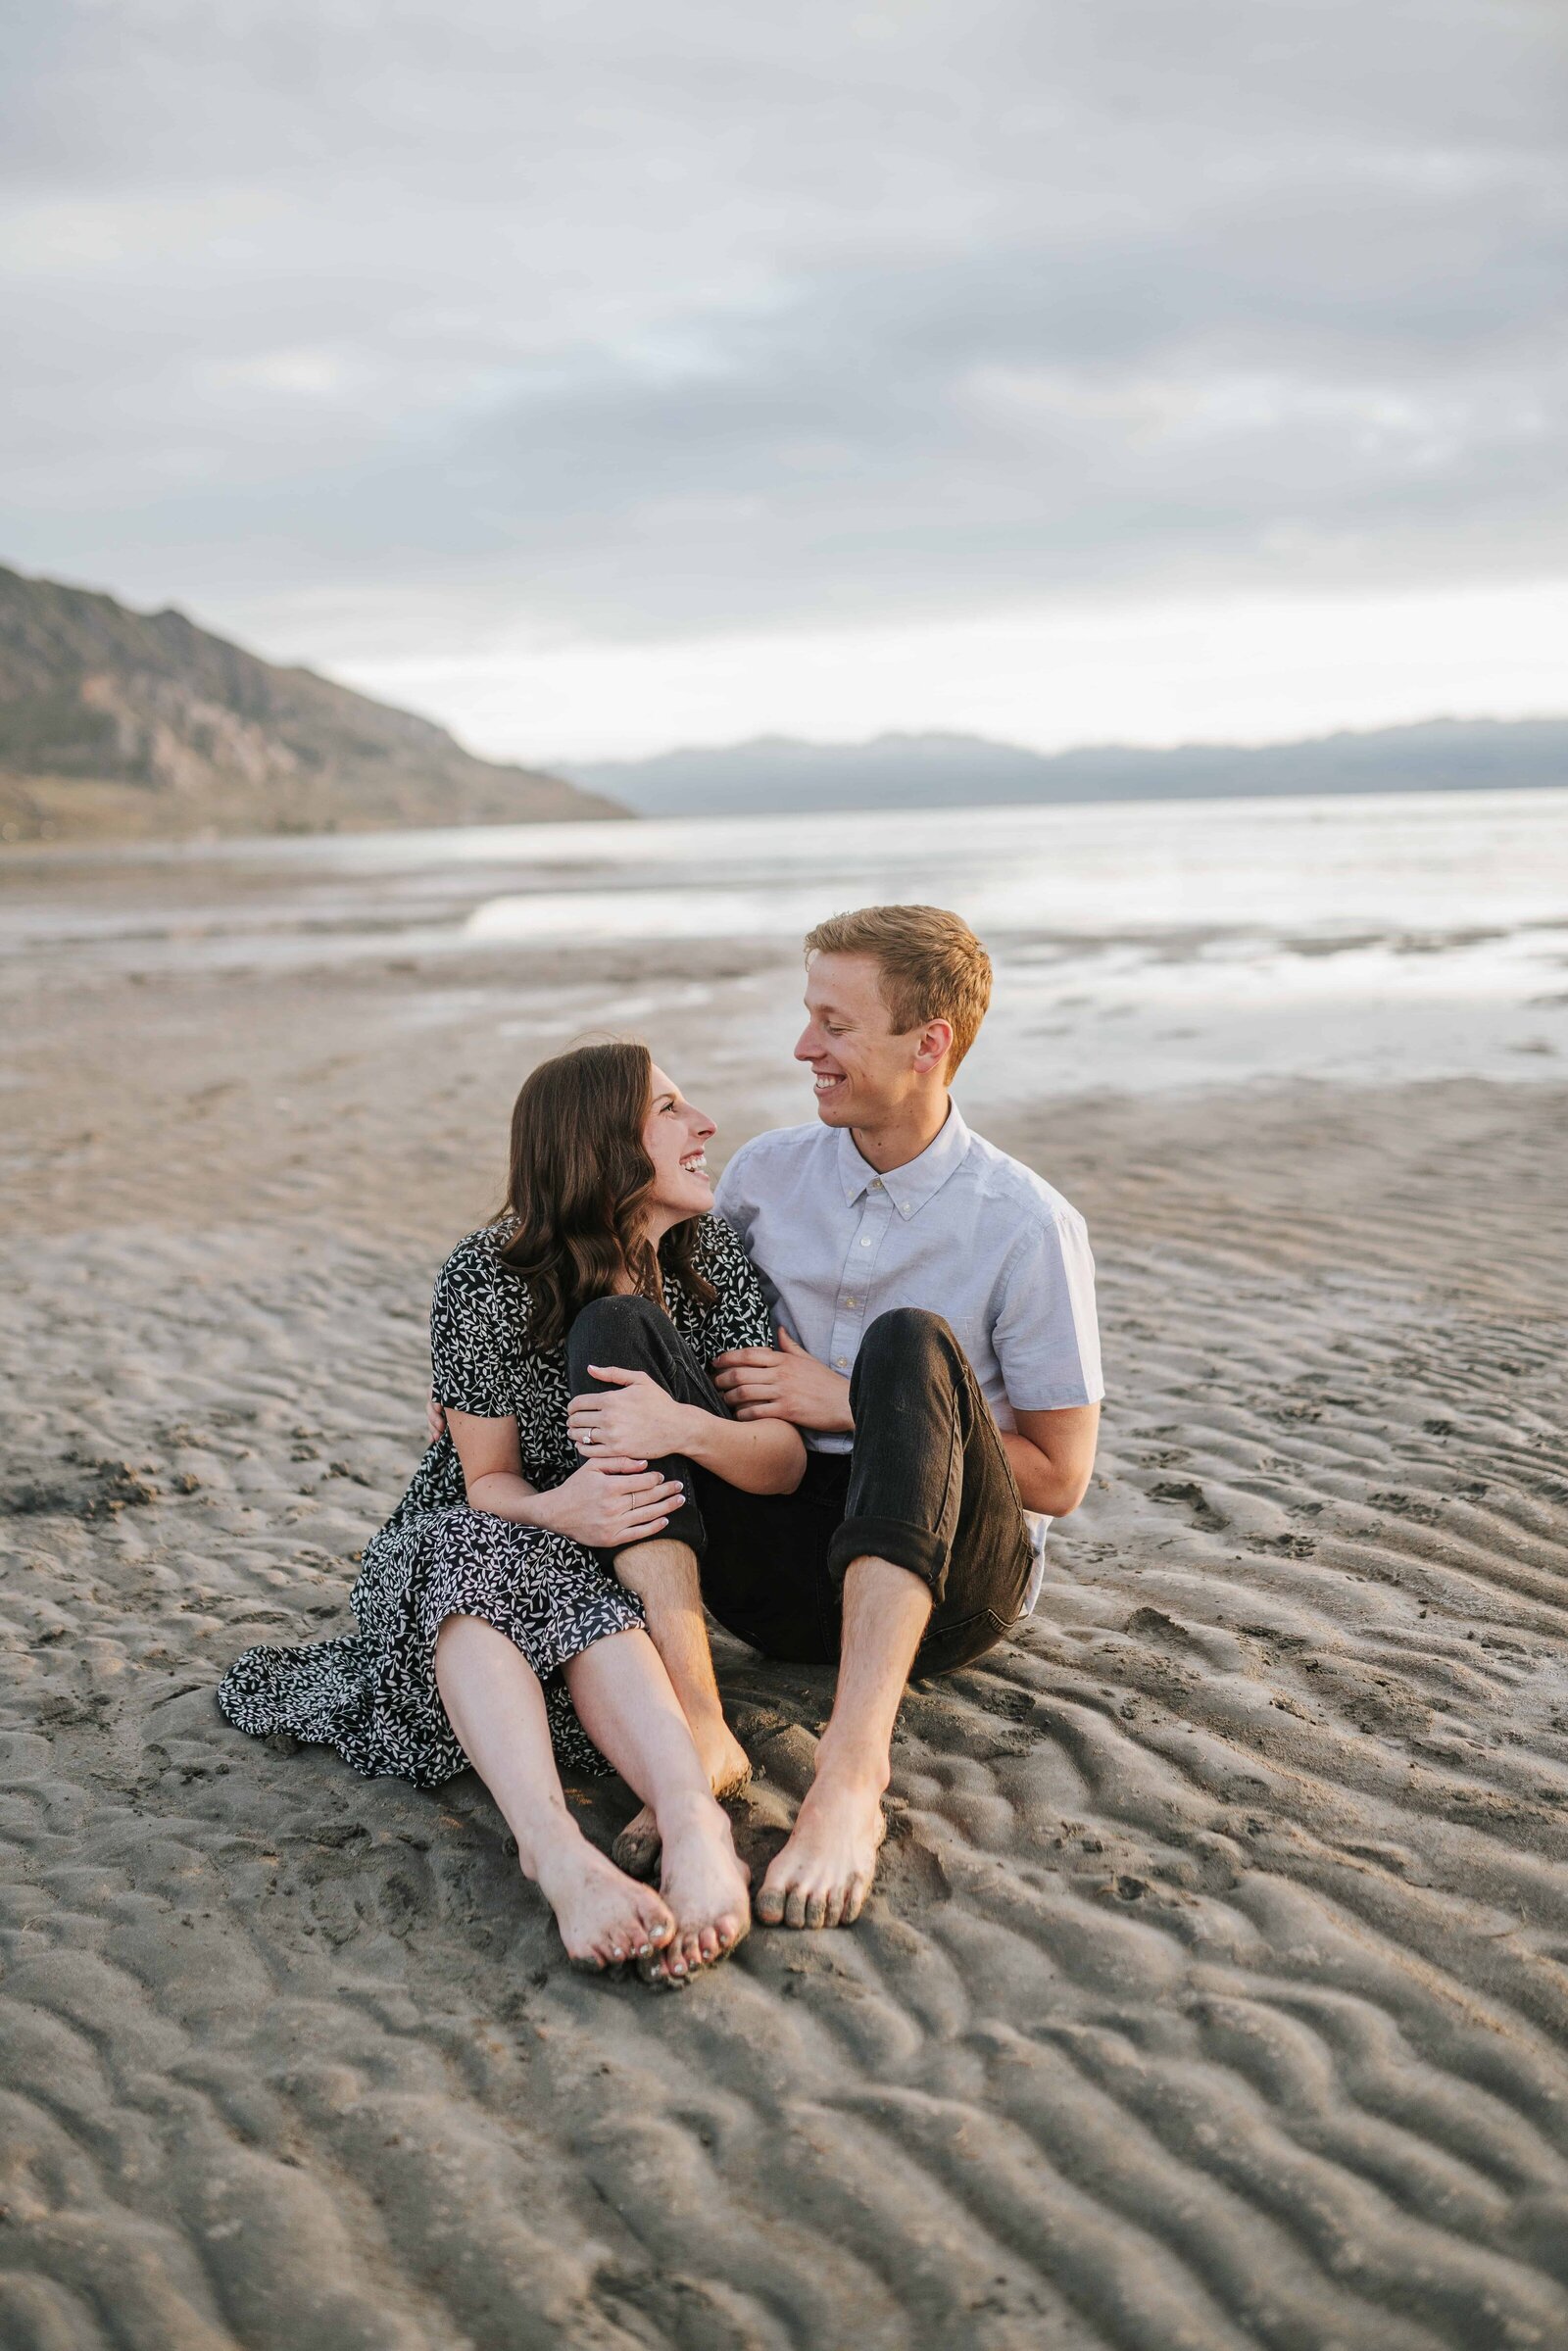 Sacramento Wedding Photographer captures couple sitting on sand by the beach during beach engagements